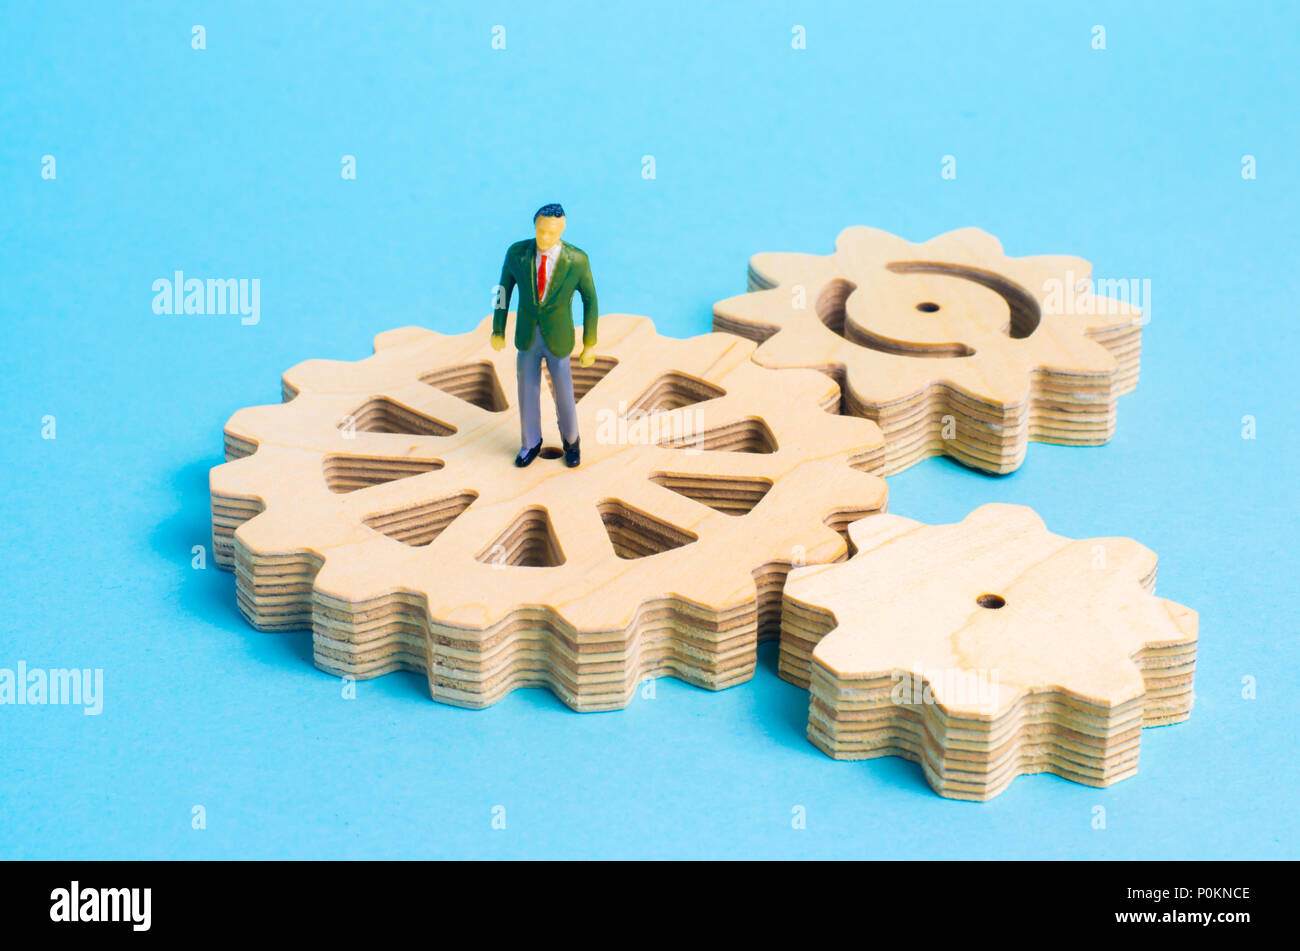 A miniature man is stands on the gears. The concept of the business process, the generation of ideas and plans. Intellectual investments, innovations. Stock Photo